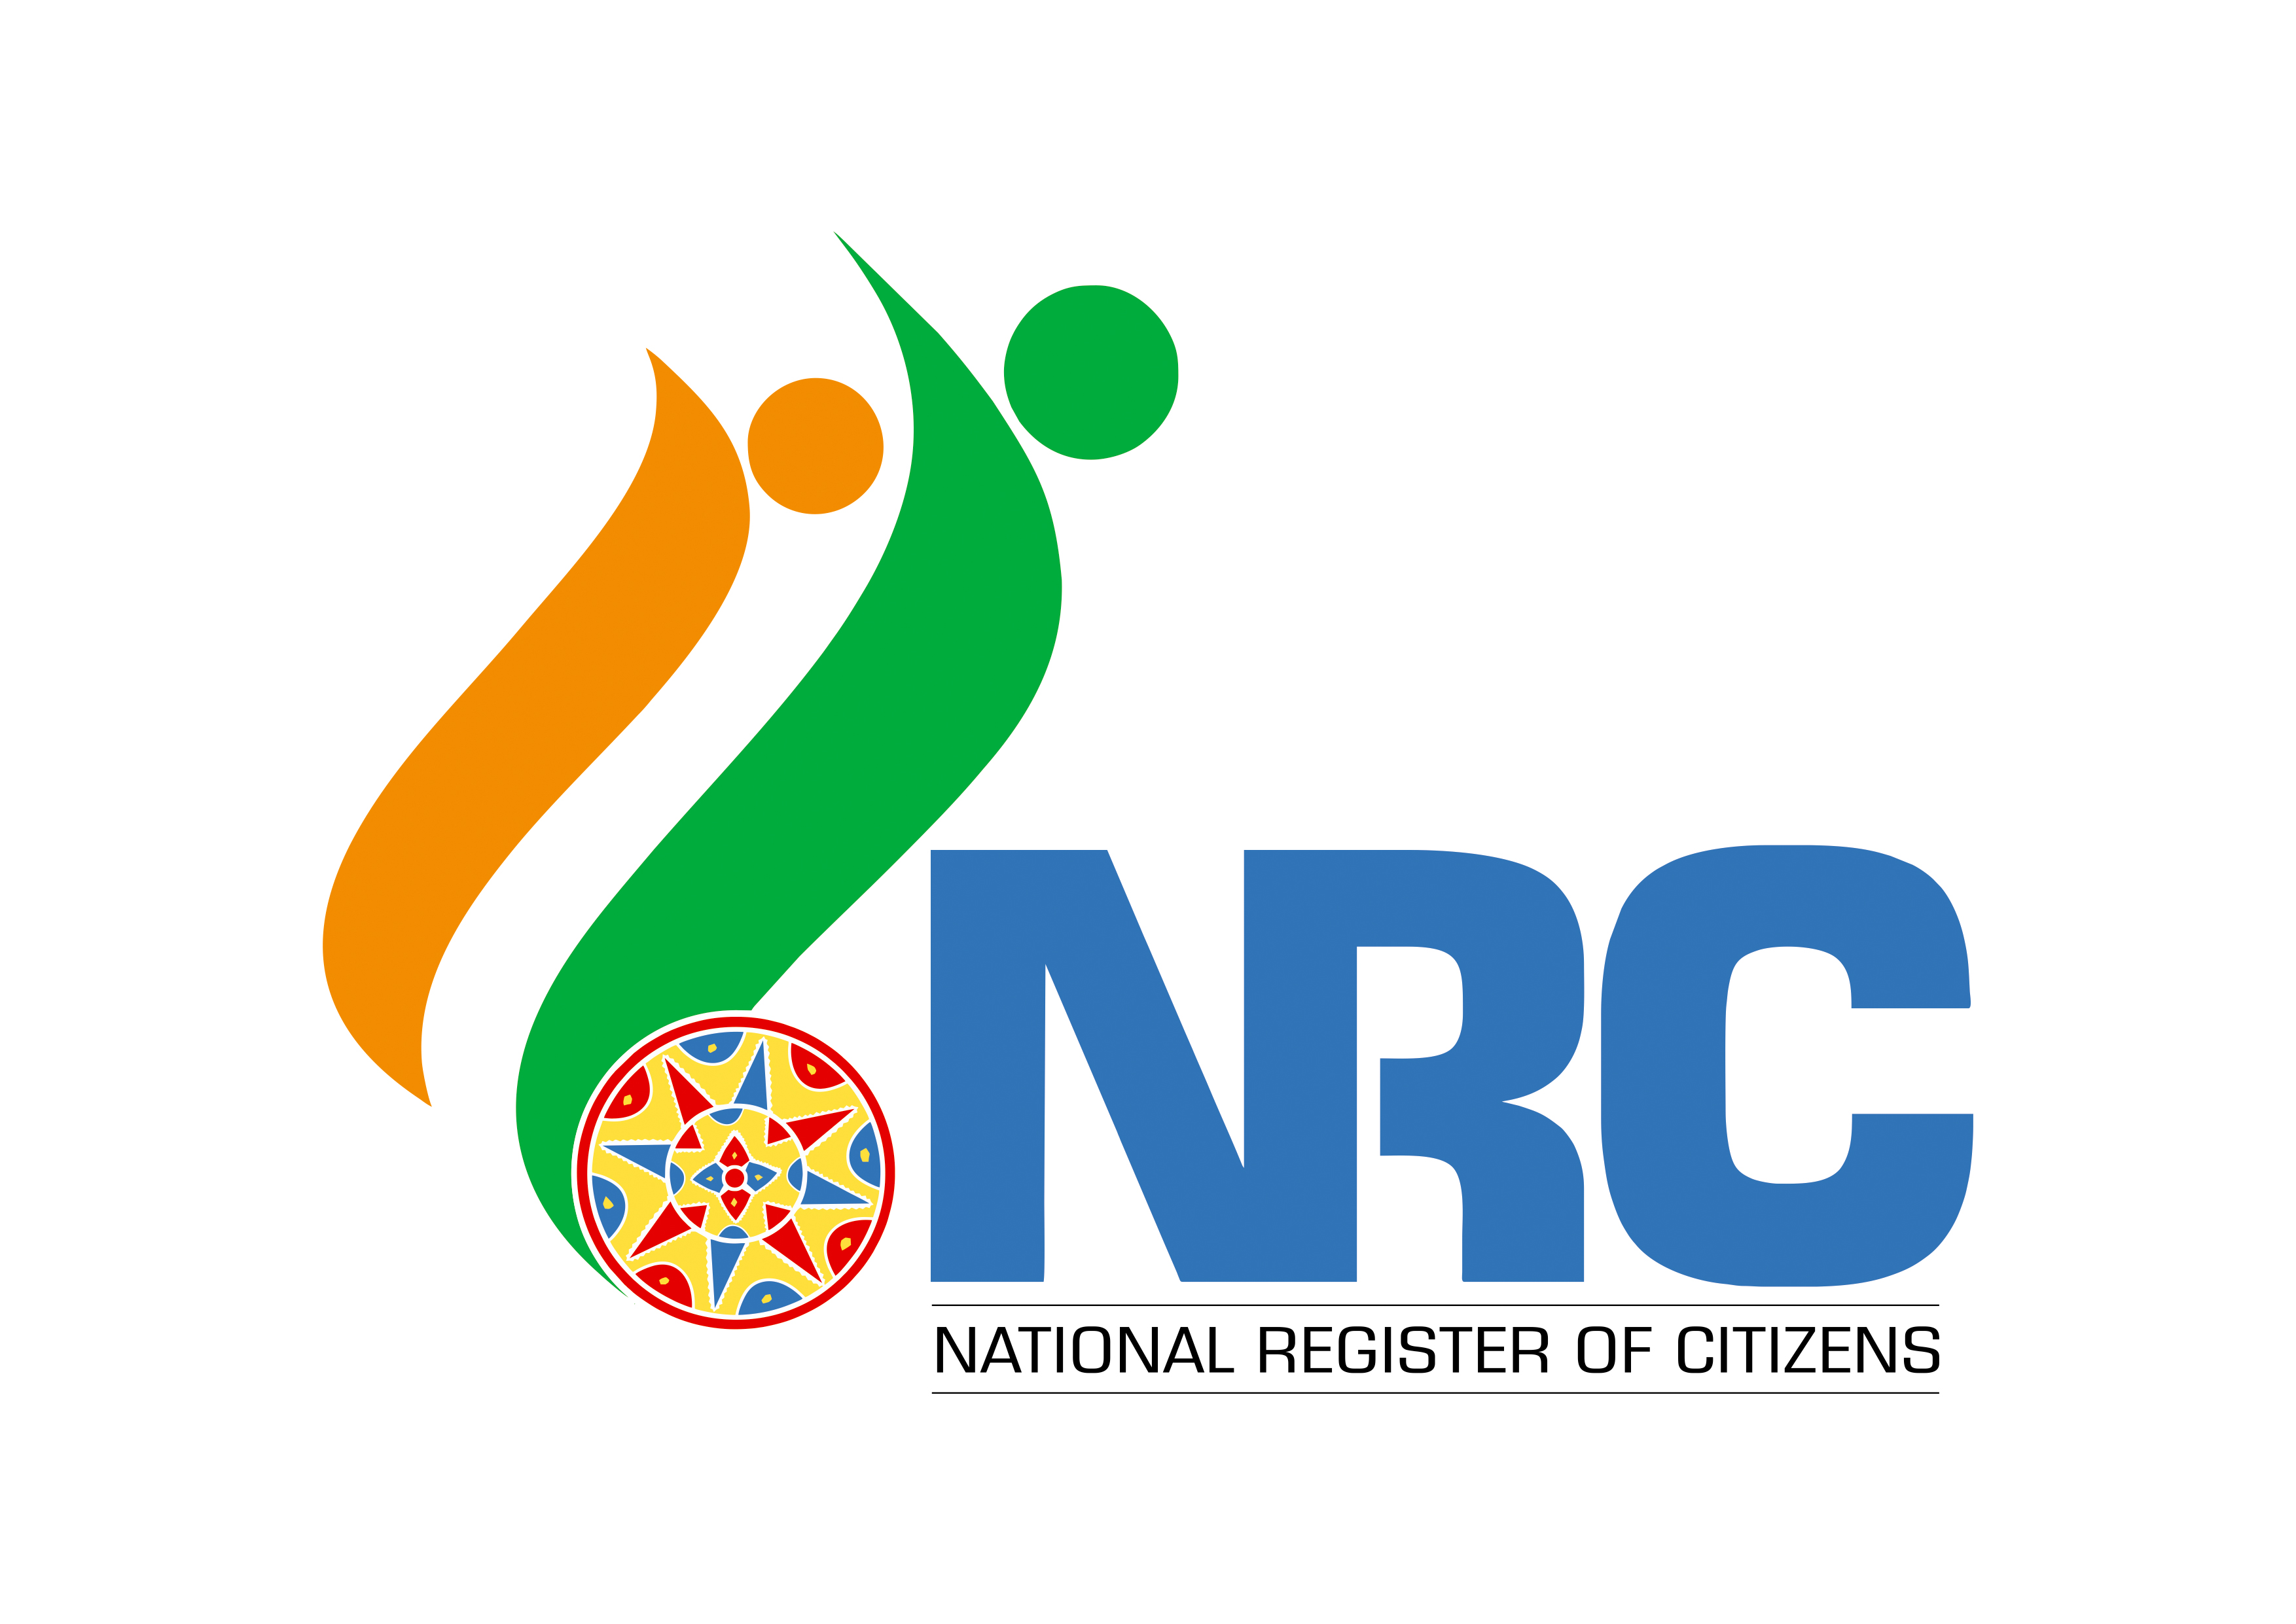 Assam government publishes additional exclusion list of 1,02,462 persons to the draft National Register of Citizens (NRC)